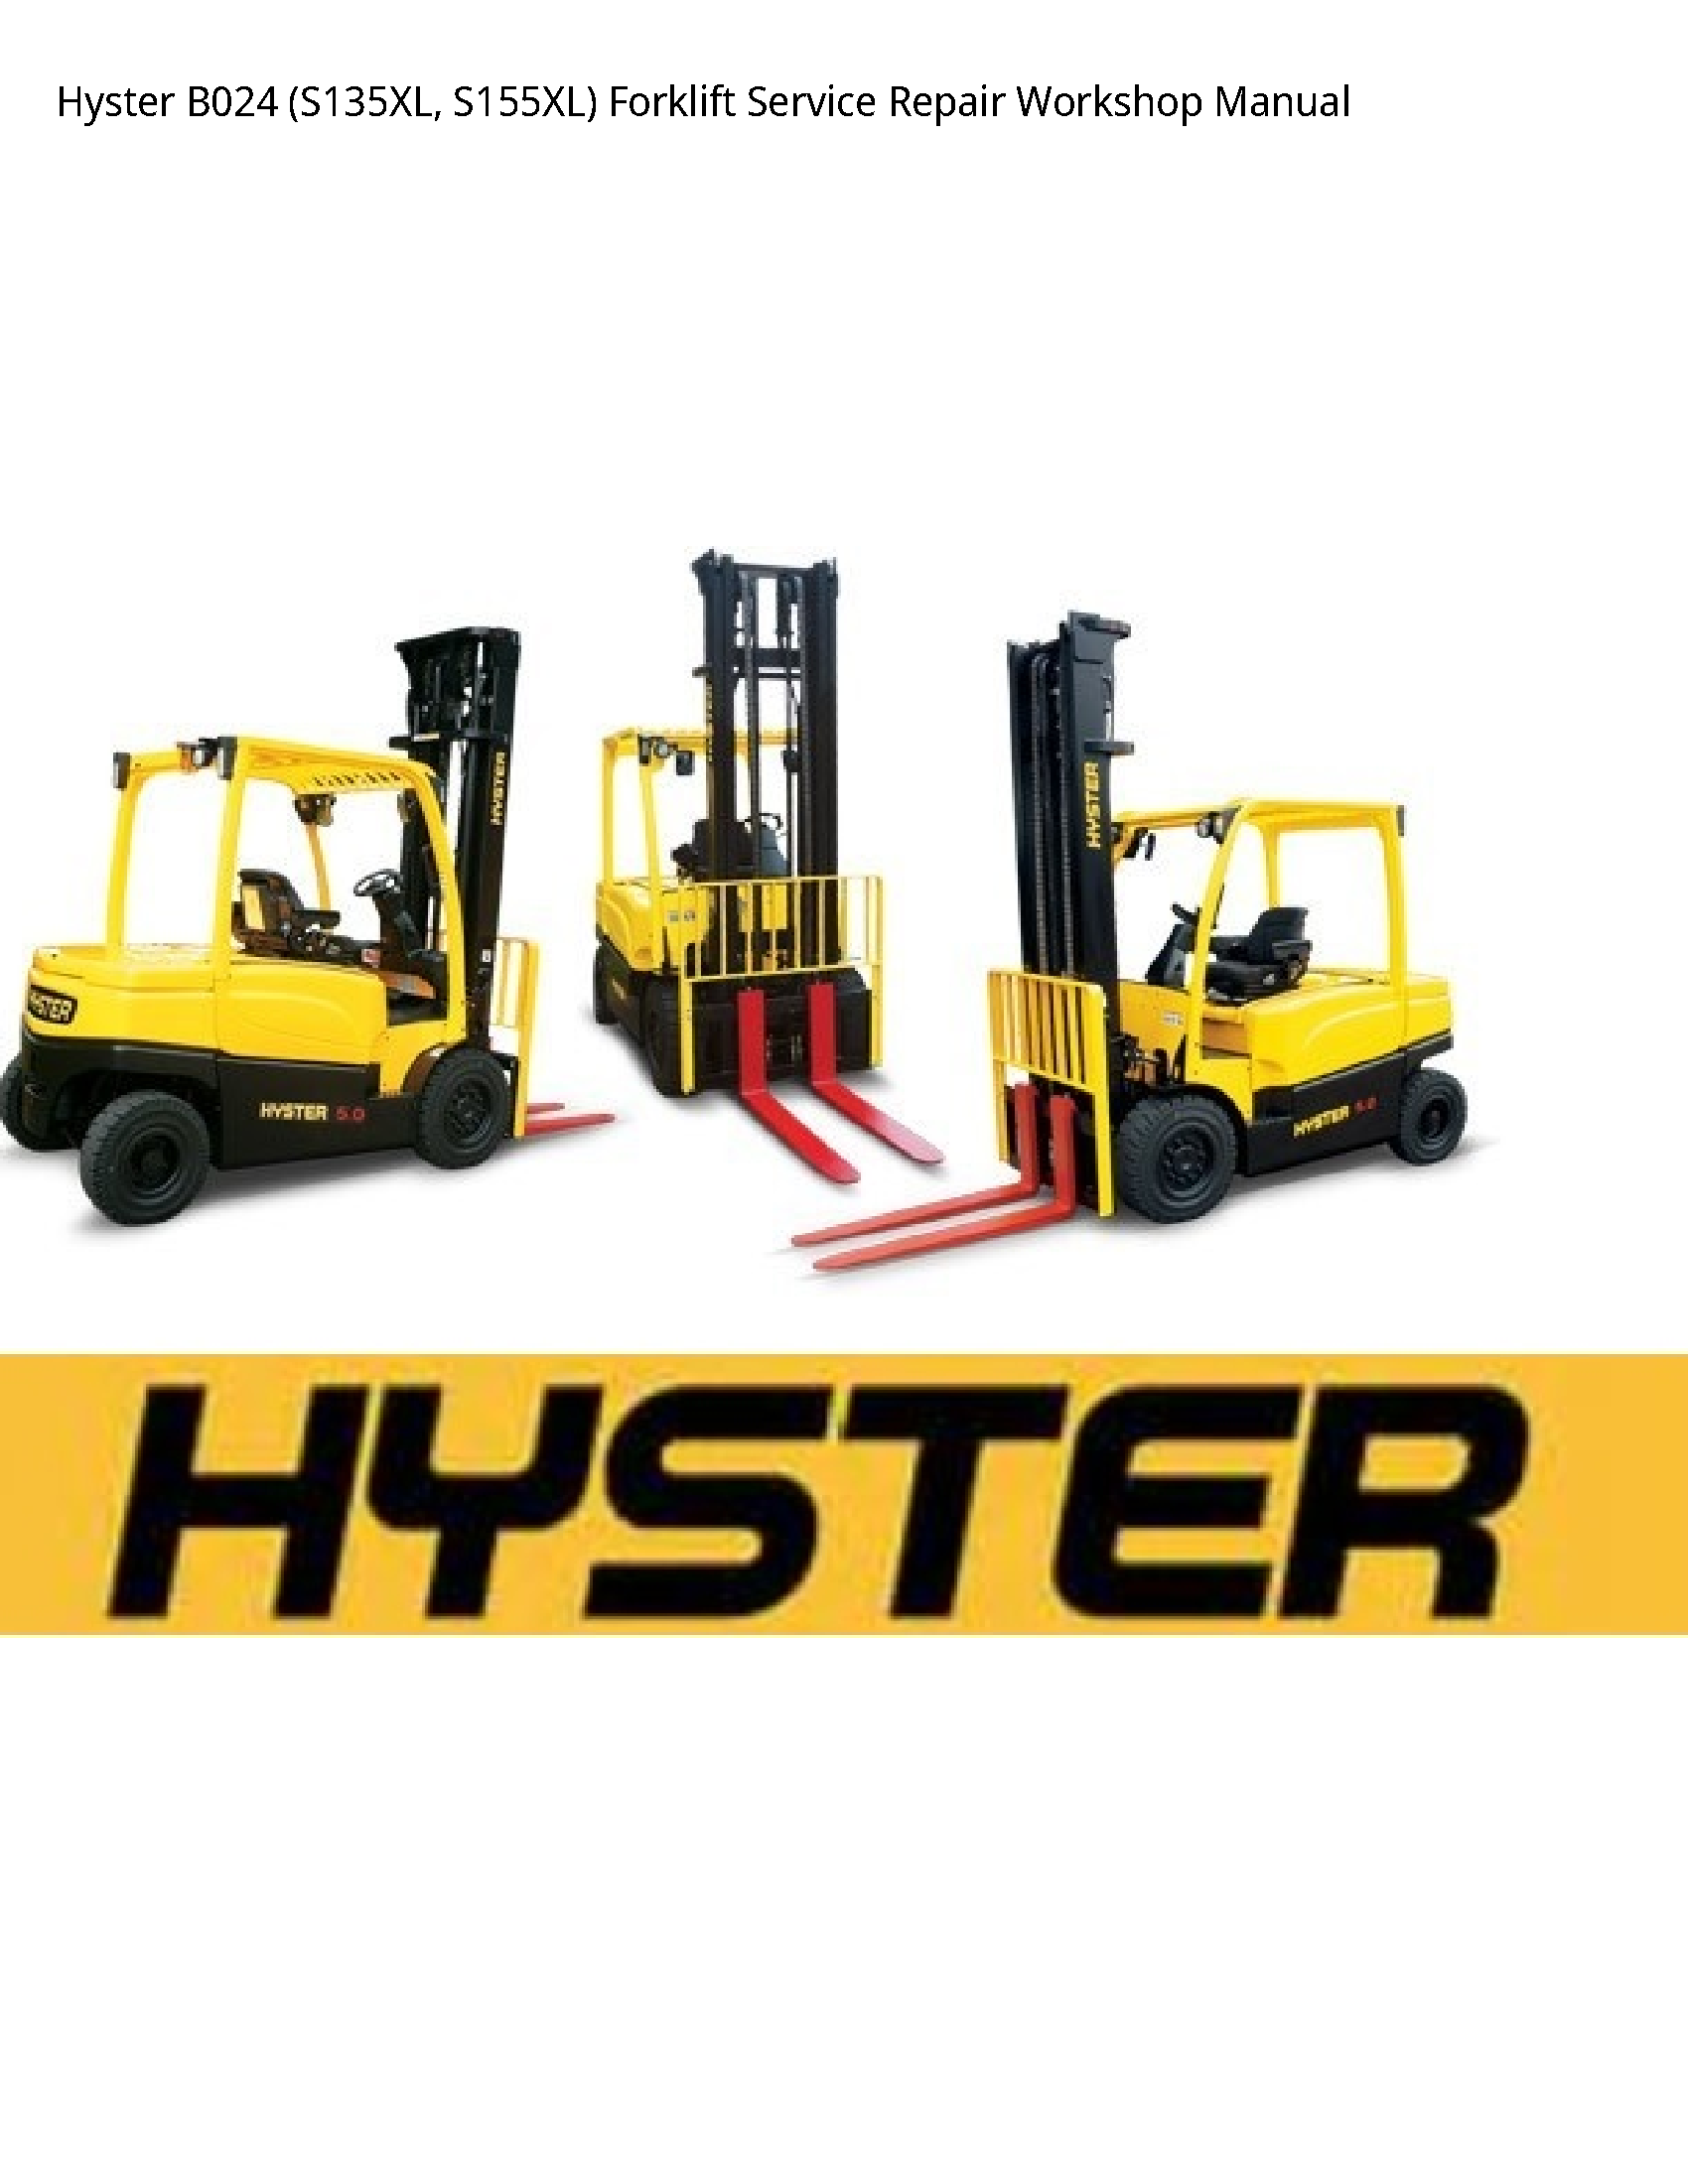 Hyster B024 Forklift manual